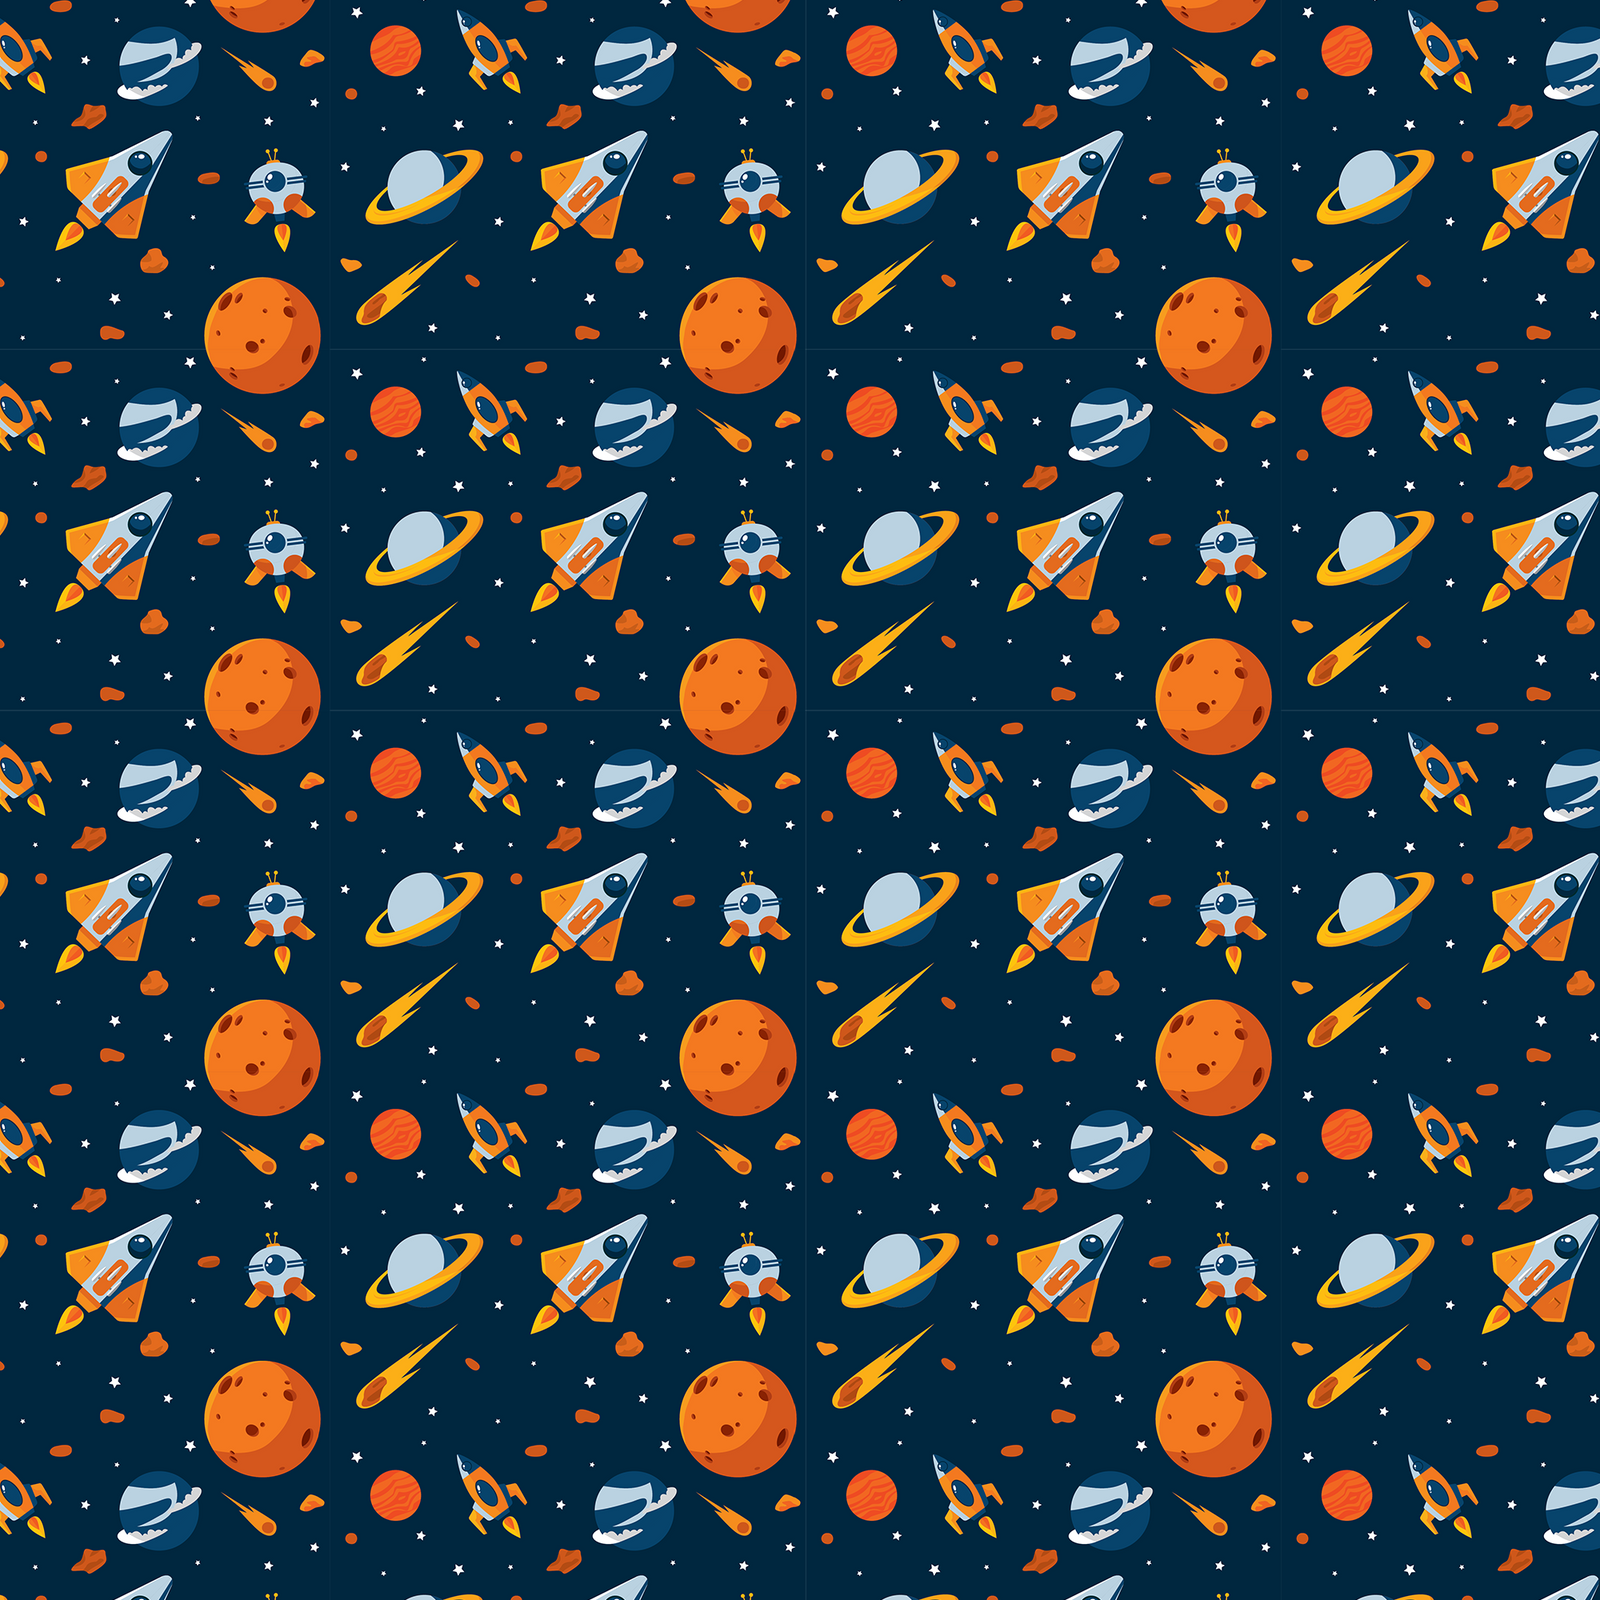 Rocket Planets and Star in Space Theme Wallpaper (R384)